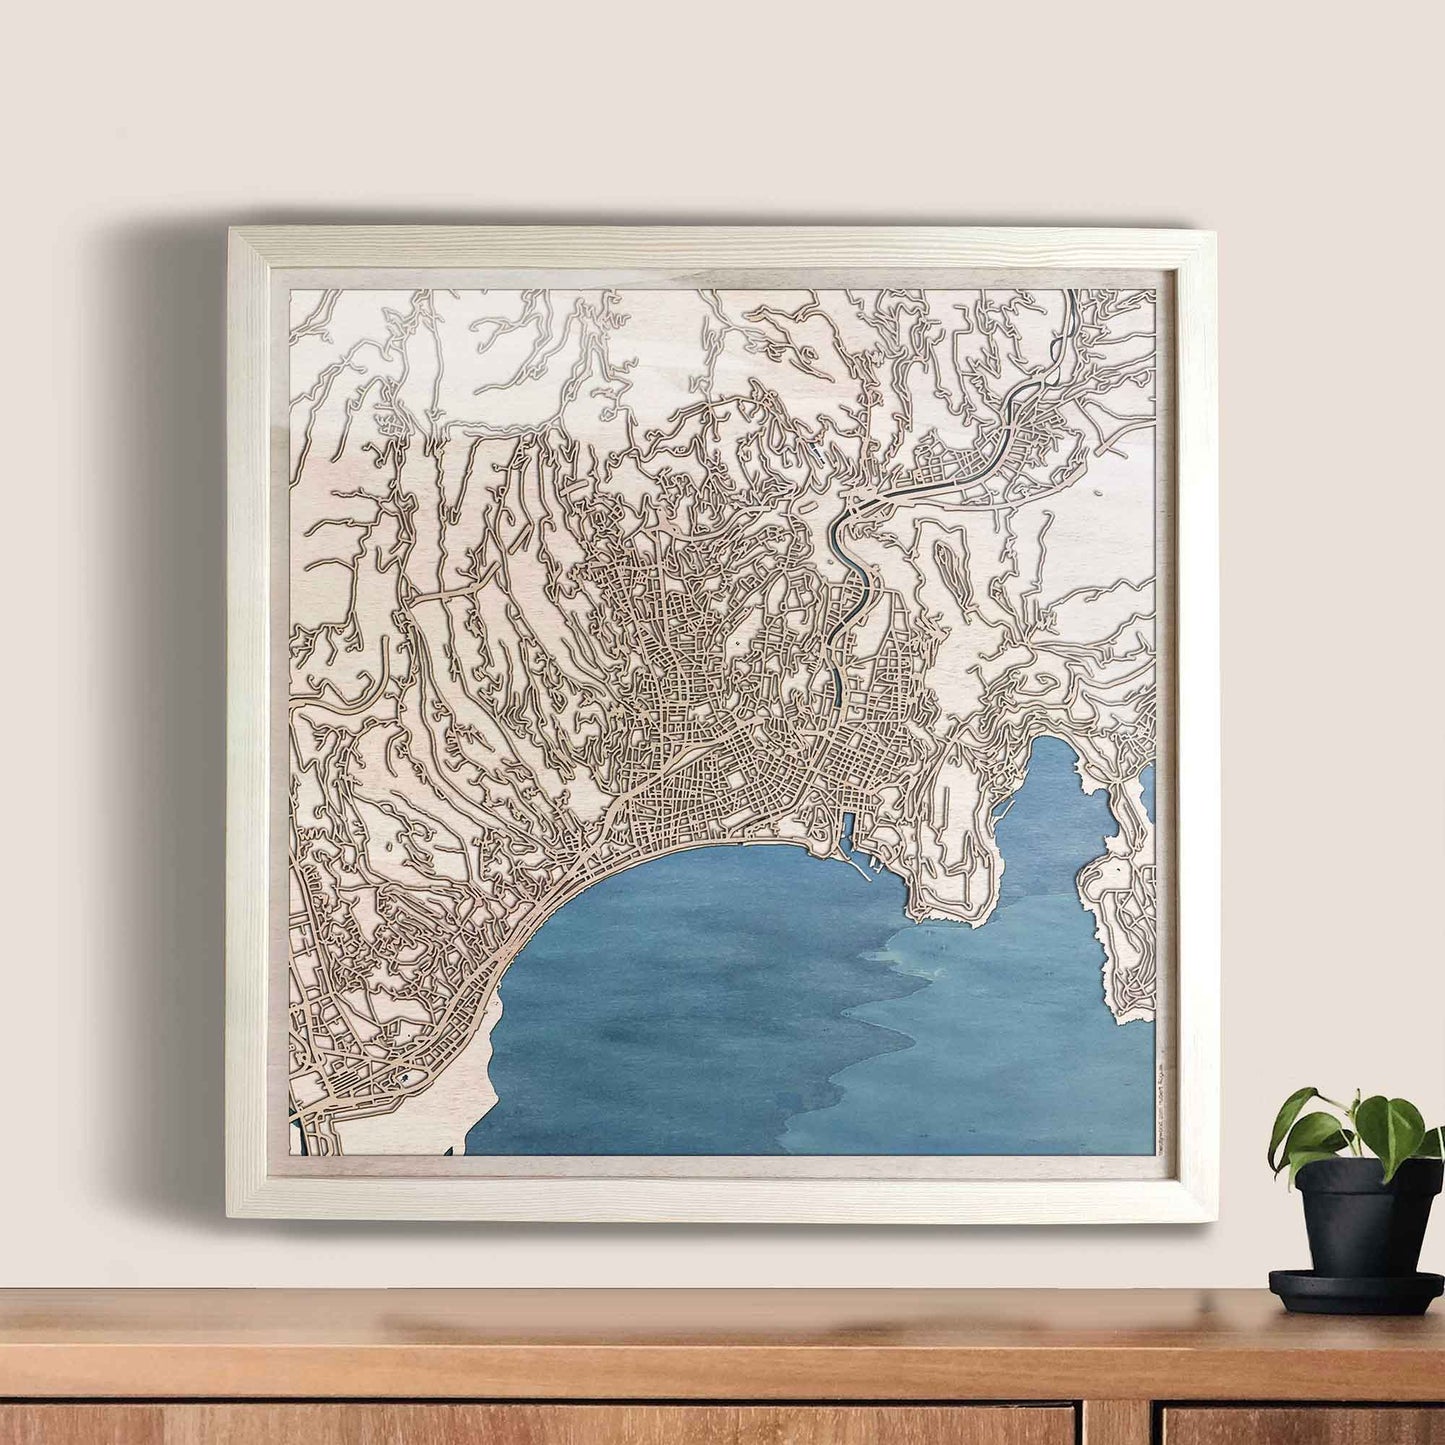 Nice Wooden Map by CityWood - Custom Wood Map Art - Unique Laser Cut Engraved - Anniversary Gift